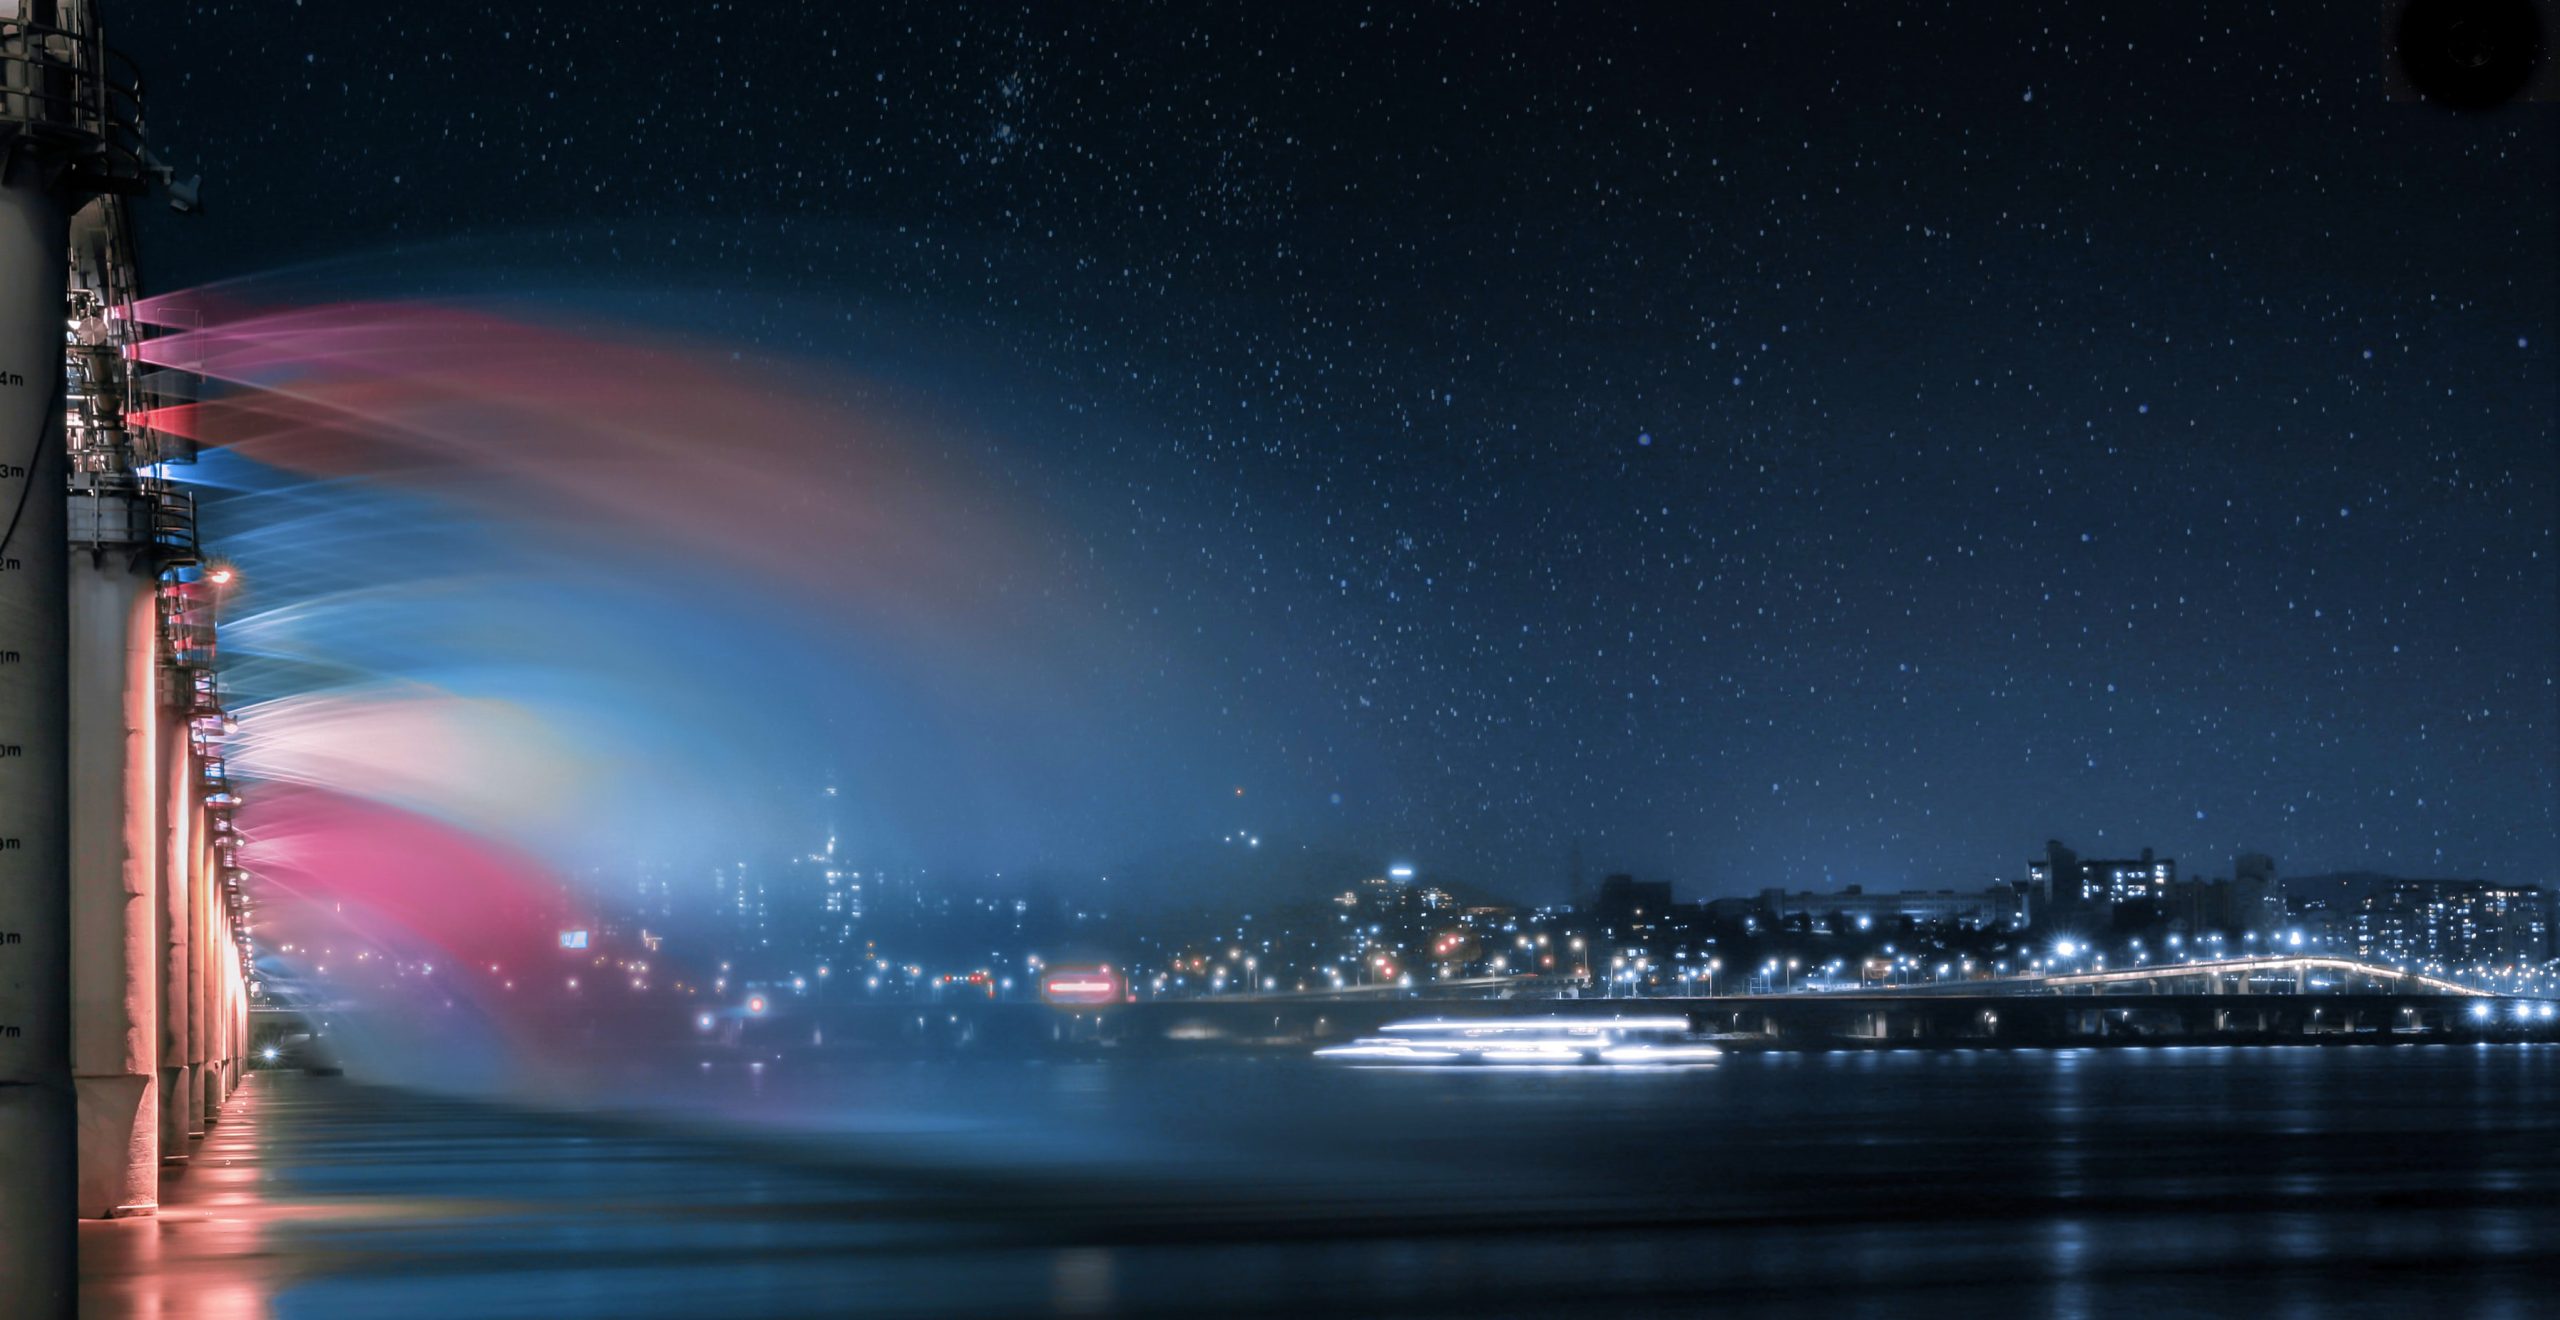 Water and light show from Moonlight Rainbow Fountain, Banpo Bridge on the Han River in Seoul, South Korea.